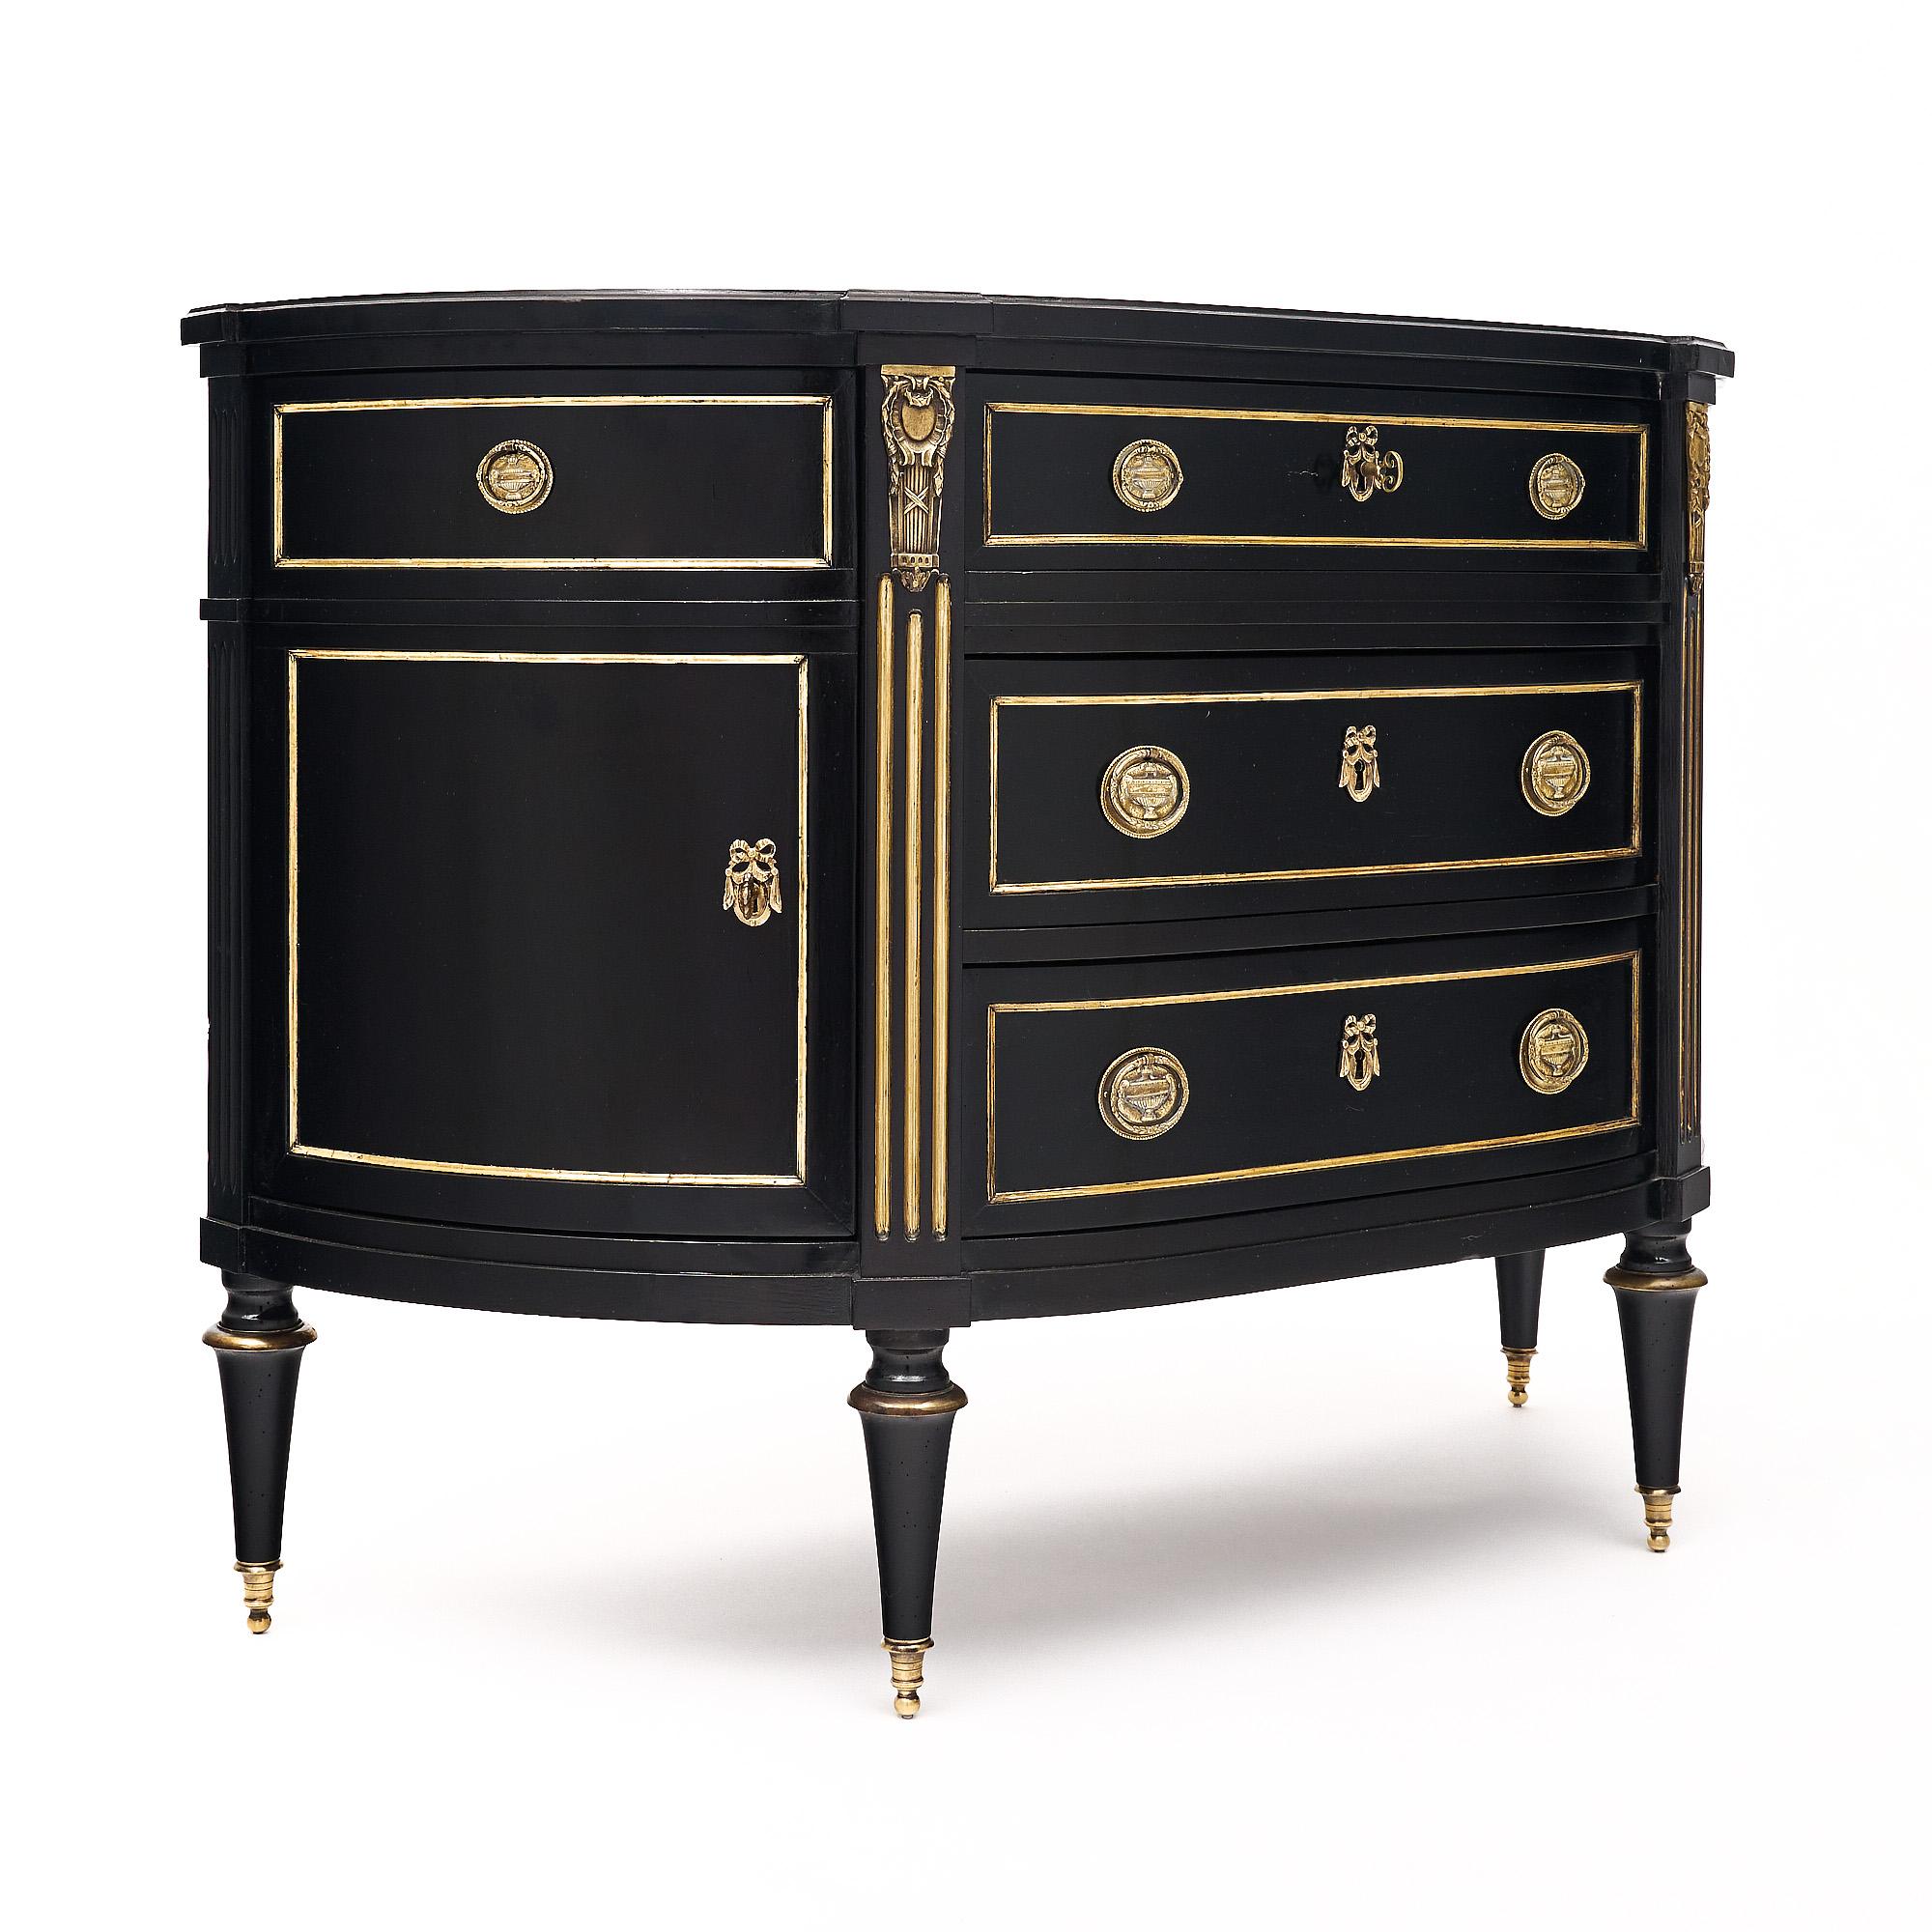 Chest of drawers from France in the Louis XVI Style. This piece is made of mahogany that has been ebonized and finished with a lustrous French polish finish of museum-quality. There are three dovetailed drawers in the center and two curved doors on